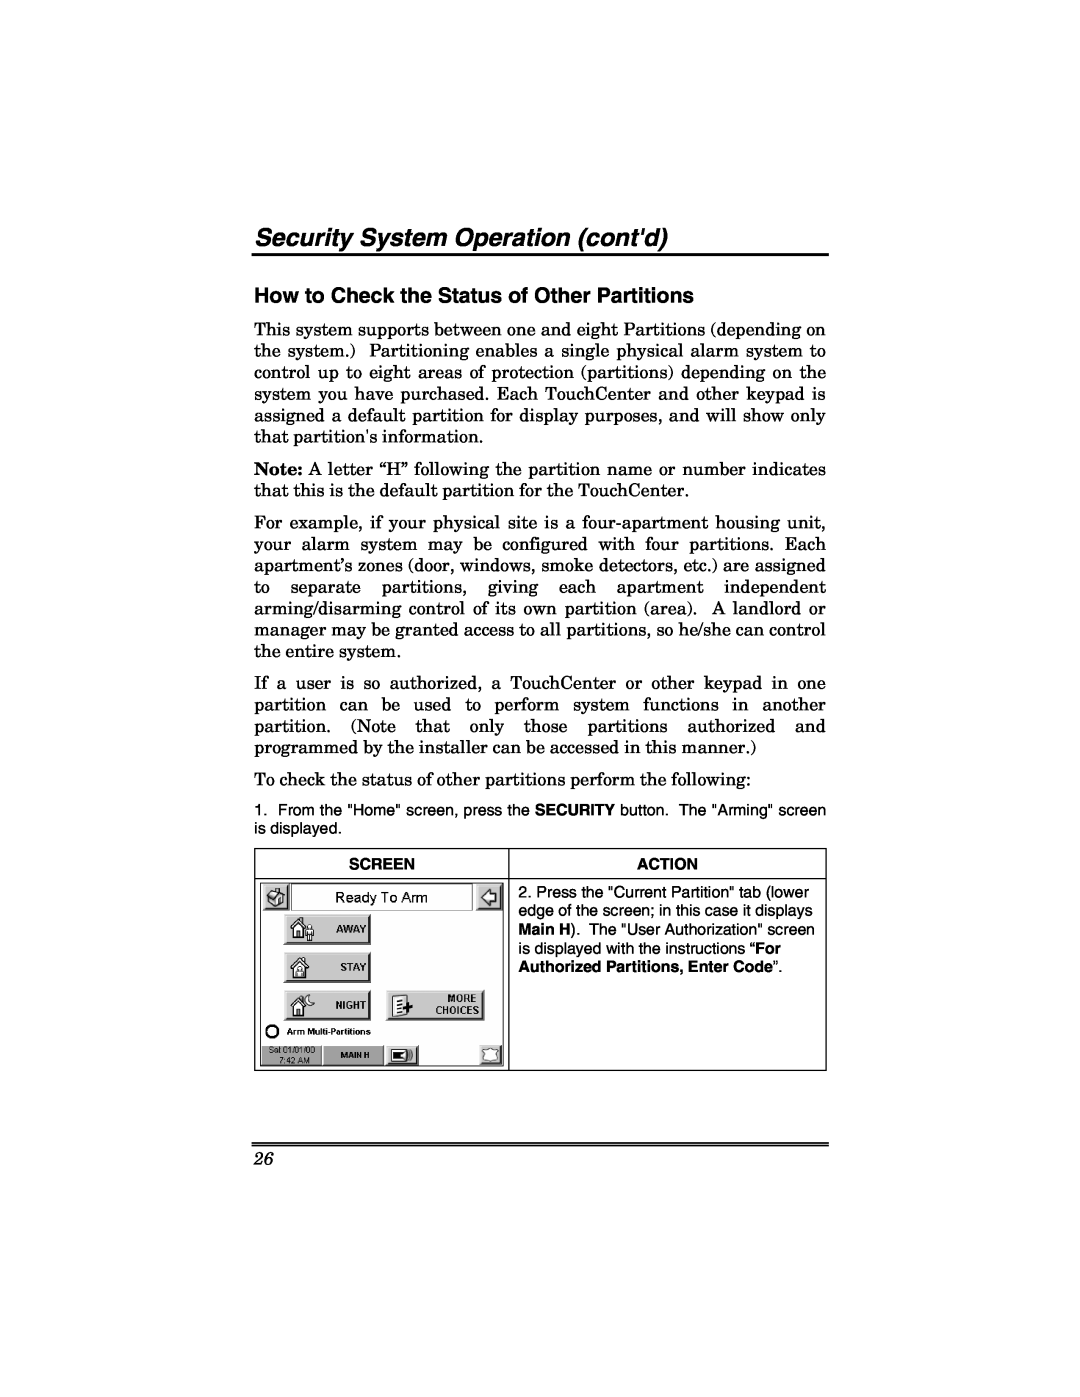 Honeywell 6271V manual How to Check the Status of Other Partitions, Security System Operation contd 